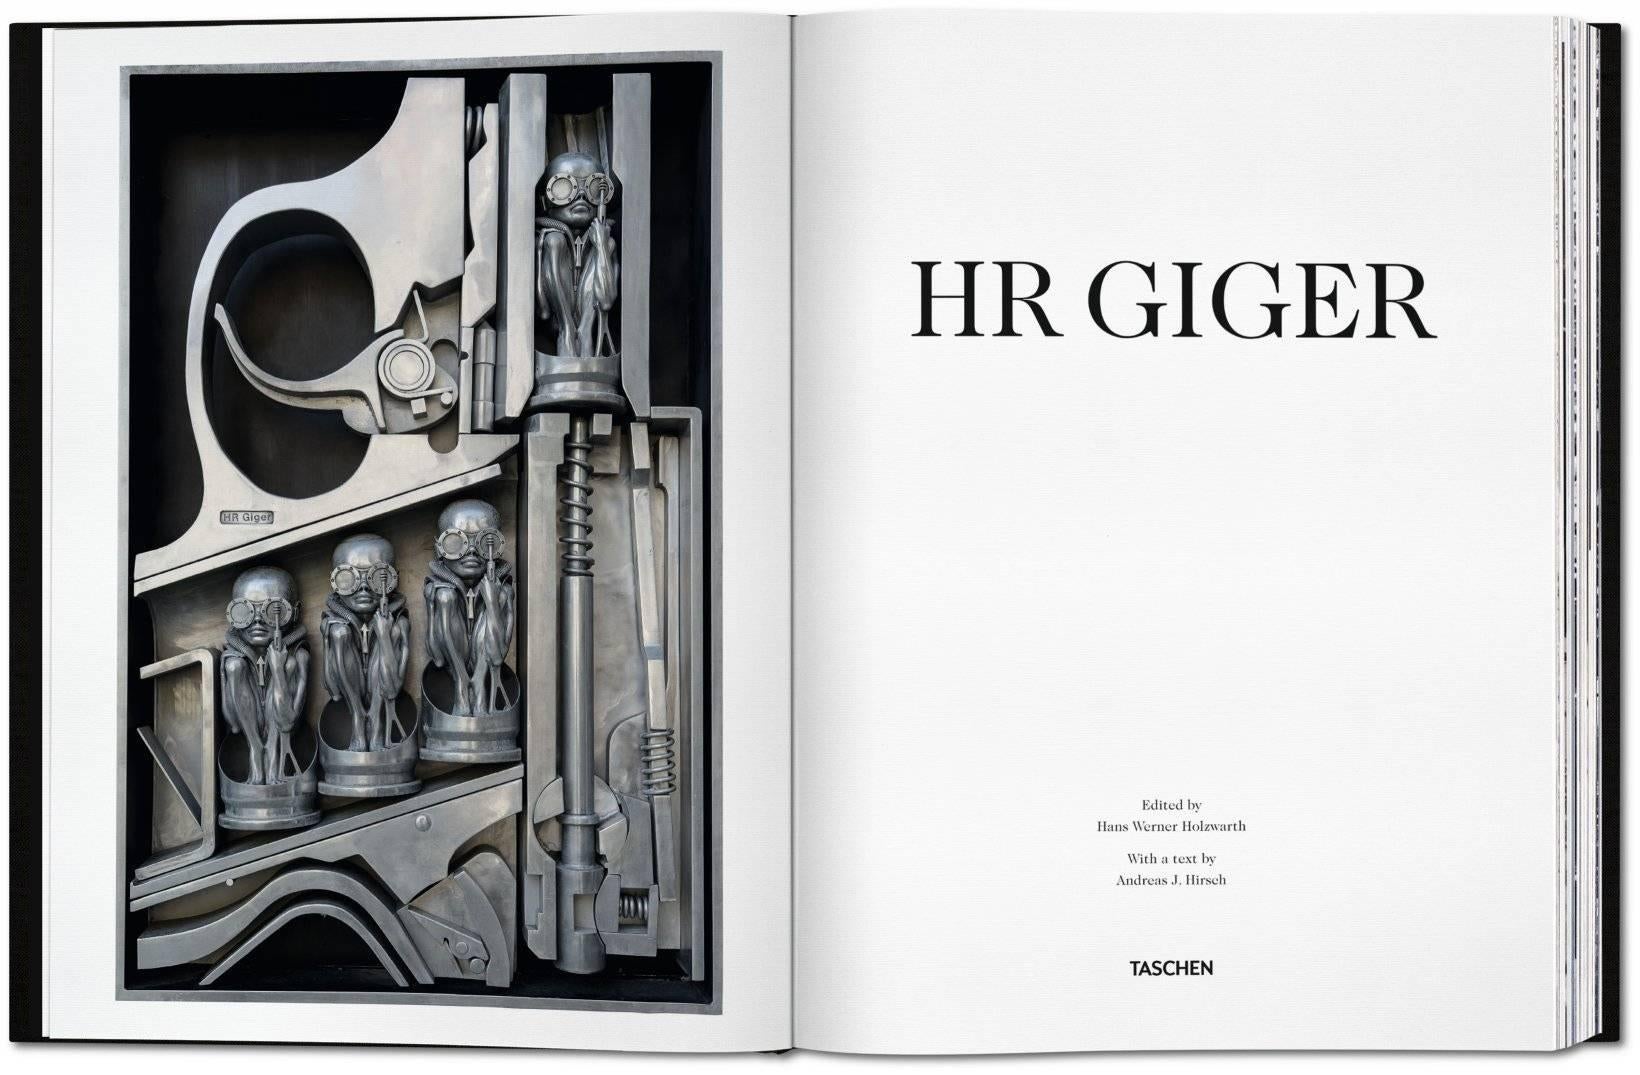 Hardcover with fold-outs in clamshell box, 14.4 x 19.7 in., 400 pages.

“At its essence, Giger’s art digs down into our psyches and touches our very deepest primal instincts and fears. His art stands in a category of its own. The proof of this